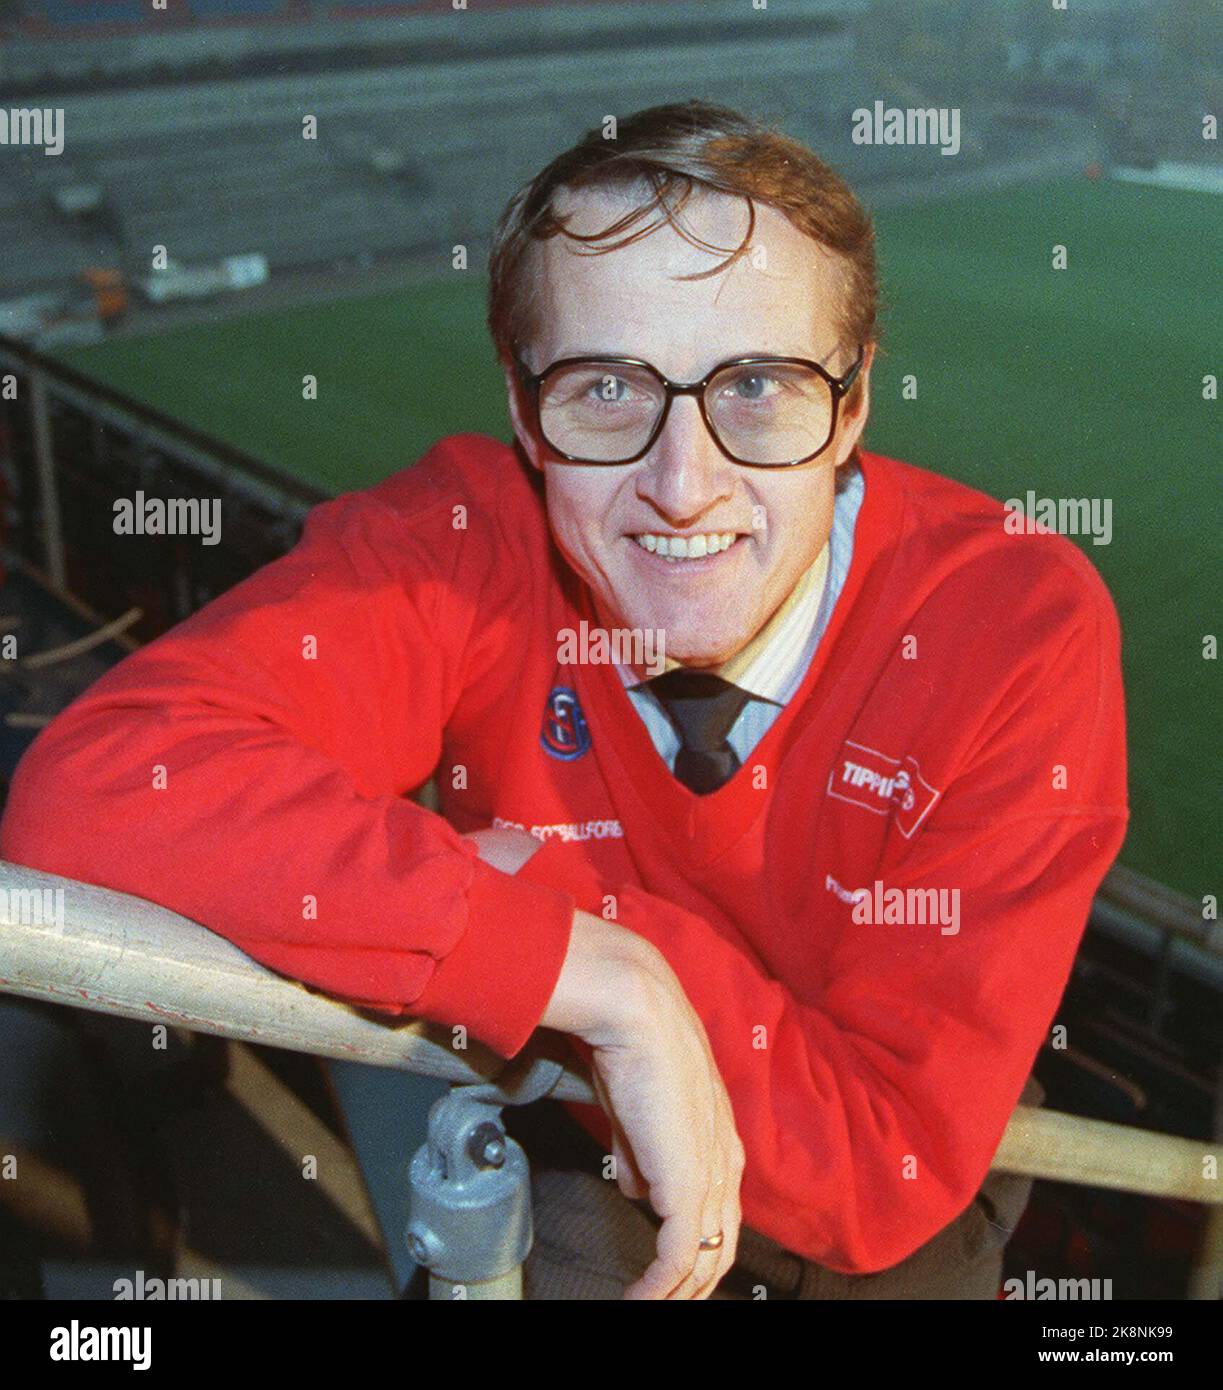 Oslo 19901016: Ivar Egeberg, former secretary general of the Norwegian Football Association, will chair the organizational committee for the ice hockey World Cup in 1999. Archive photo from 1990. Code: 24351. Photo: Jon EEG / NTB / NTB Stock Photo